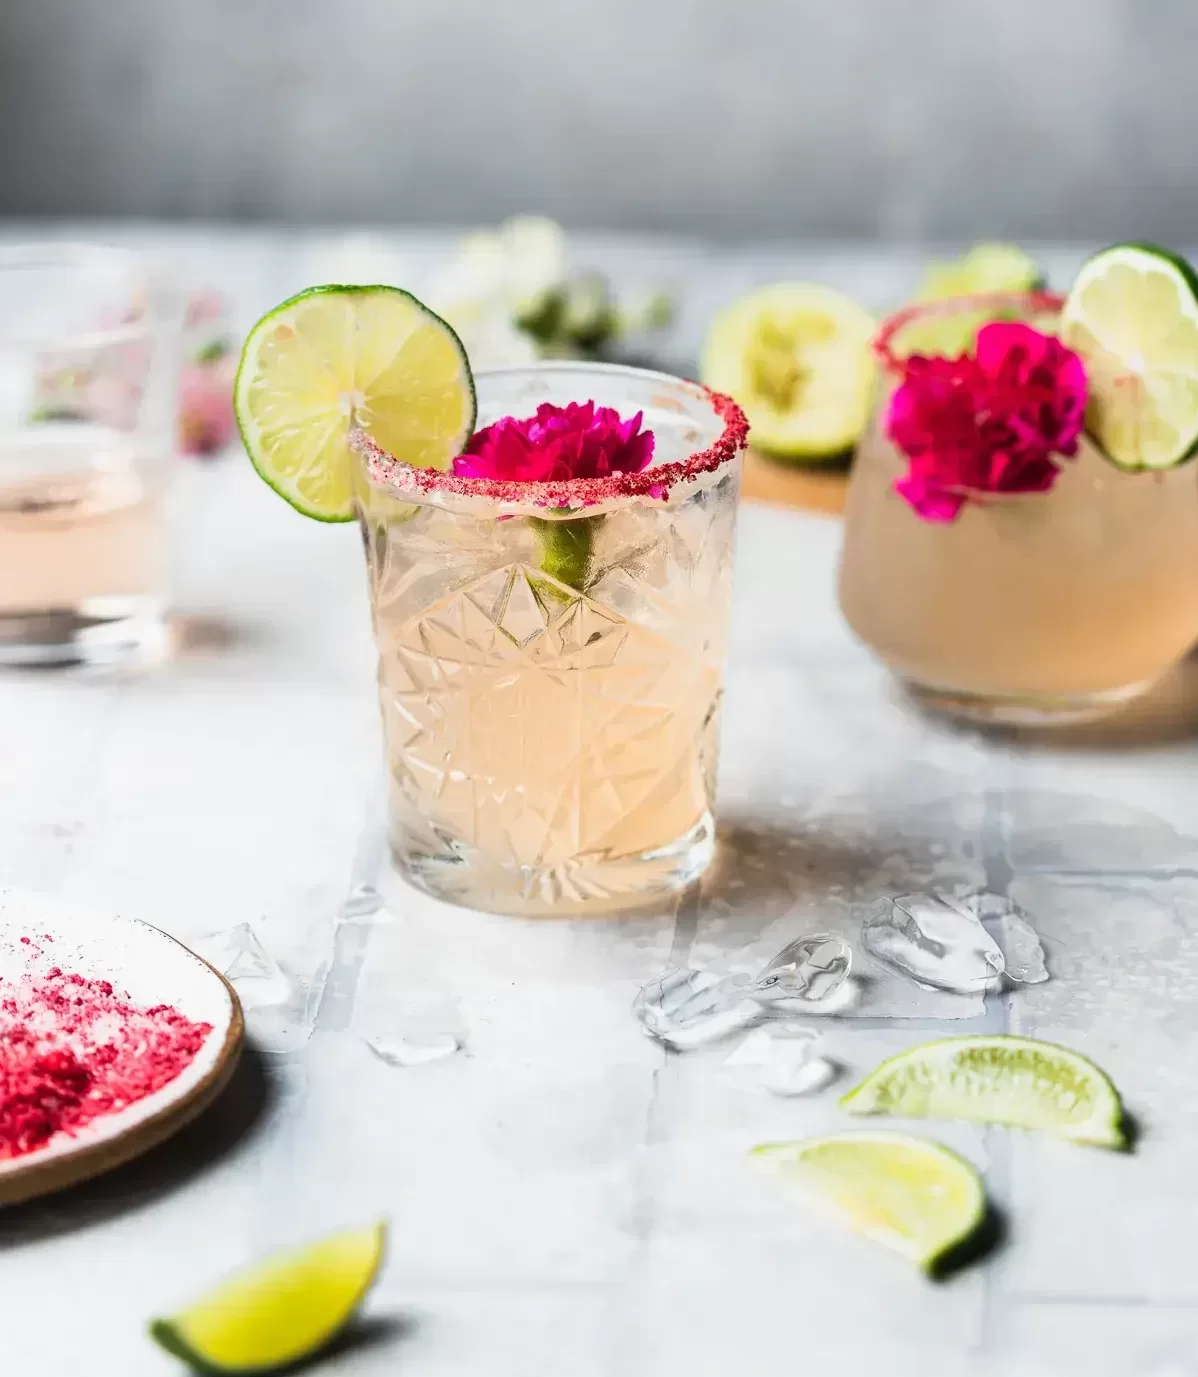 A tumbler glass with a cocktail garnished with lime and a flower.